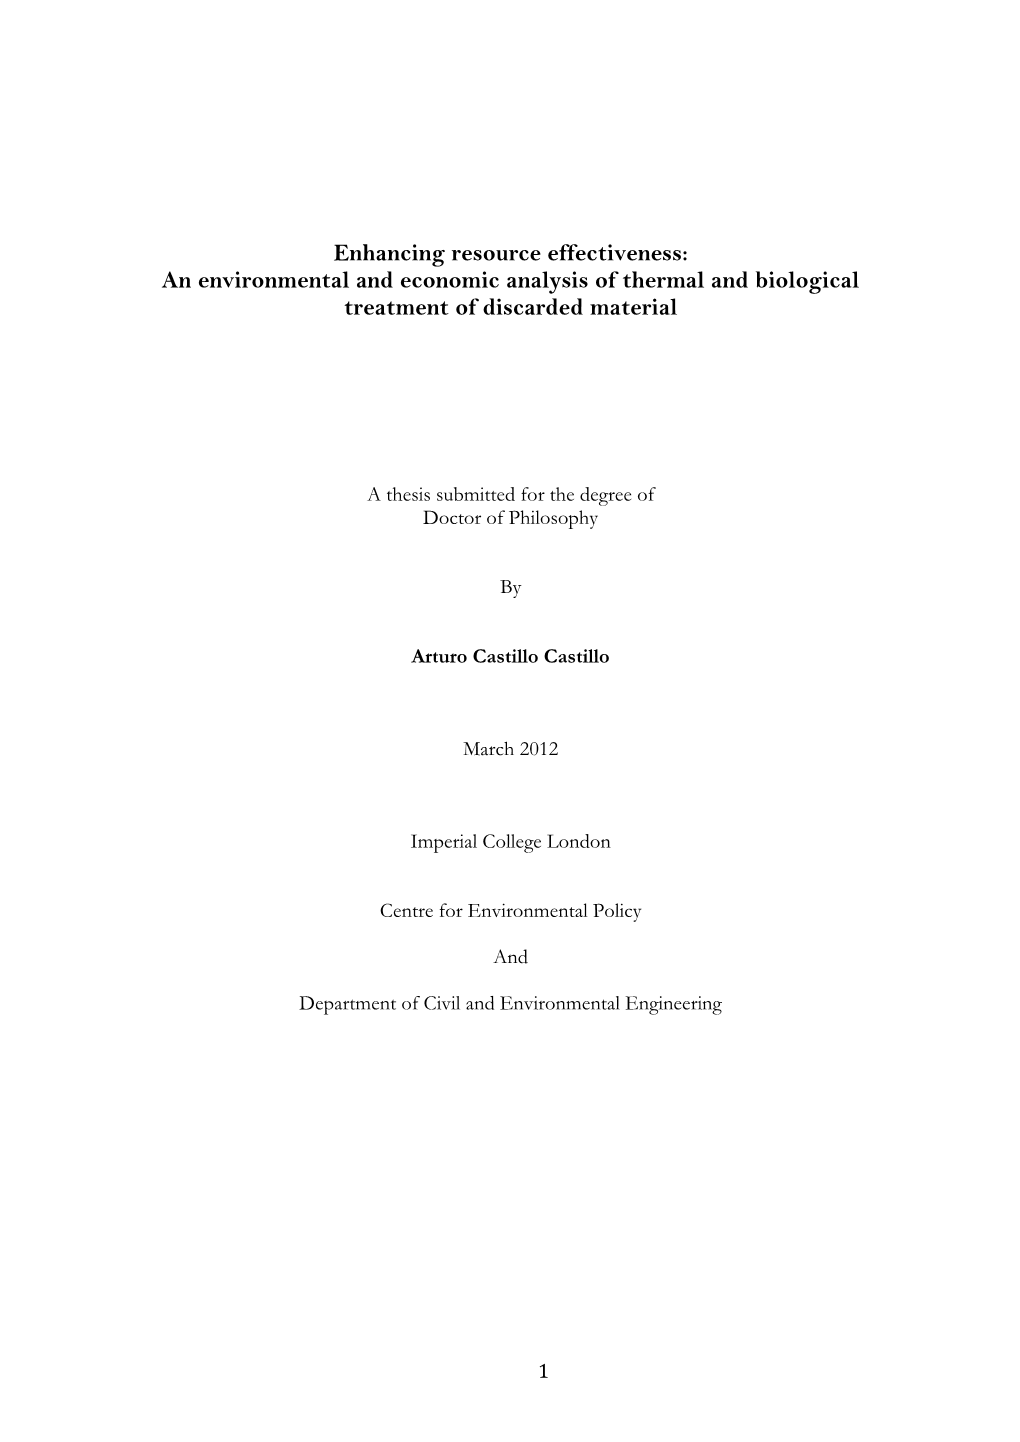 An Environmental and Economic Analysis of Thermal and Biological Treatment of Discarded Material